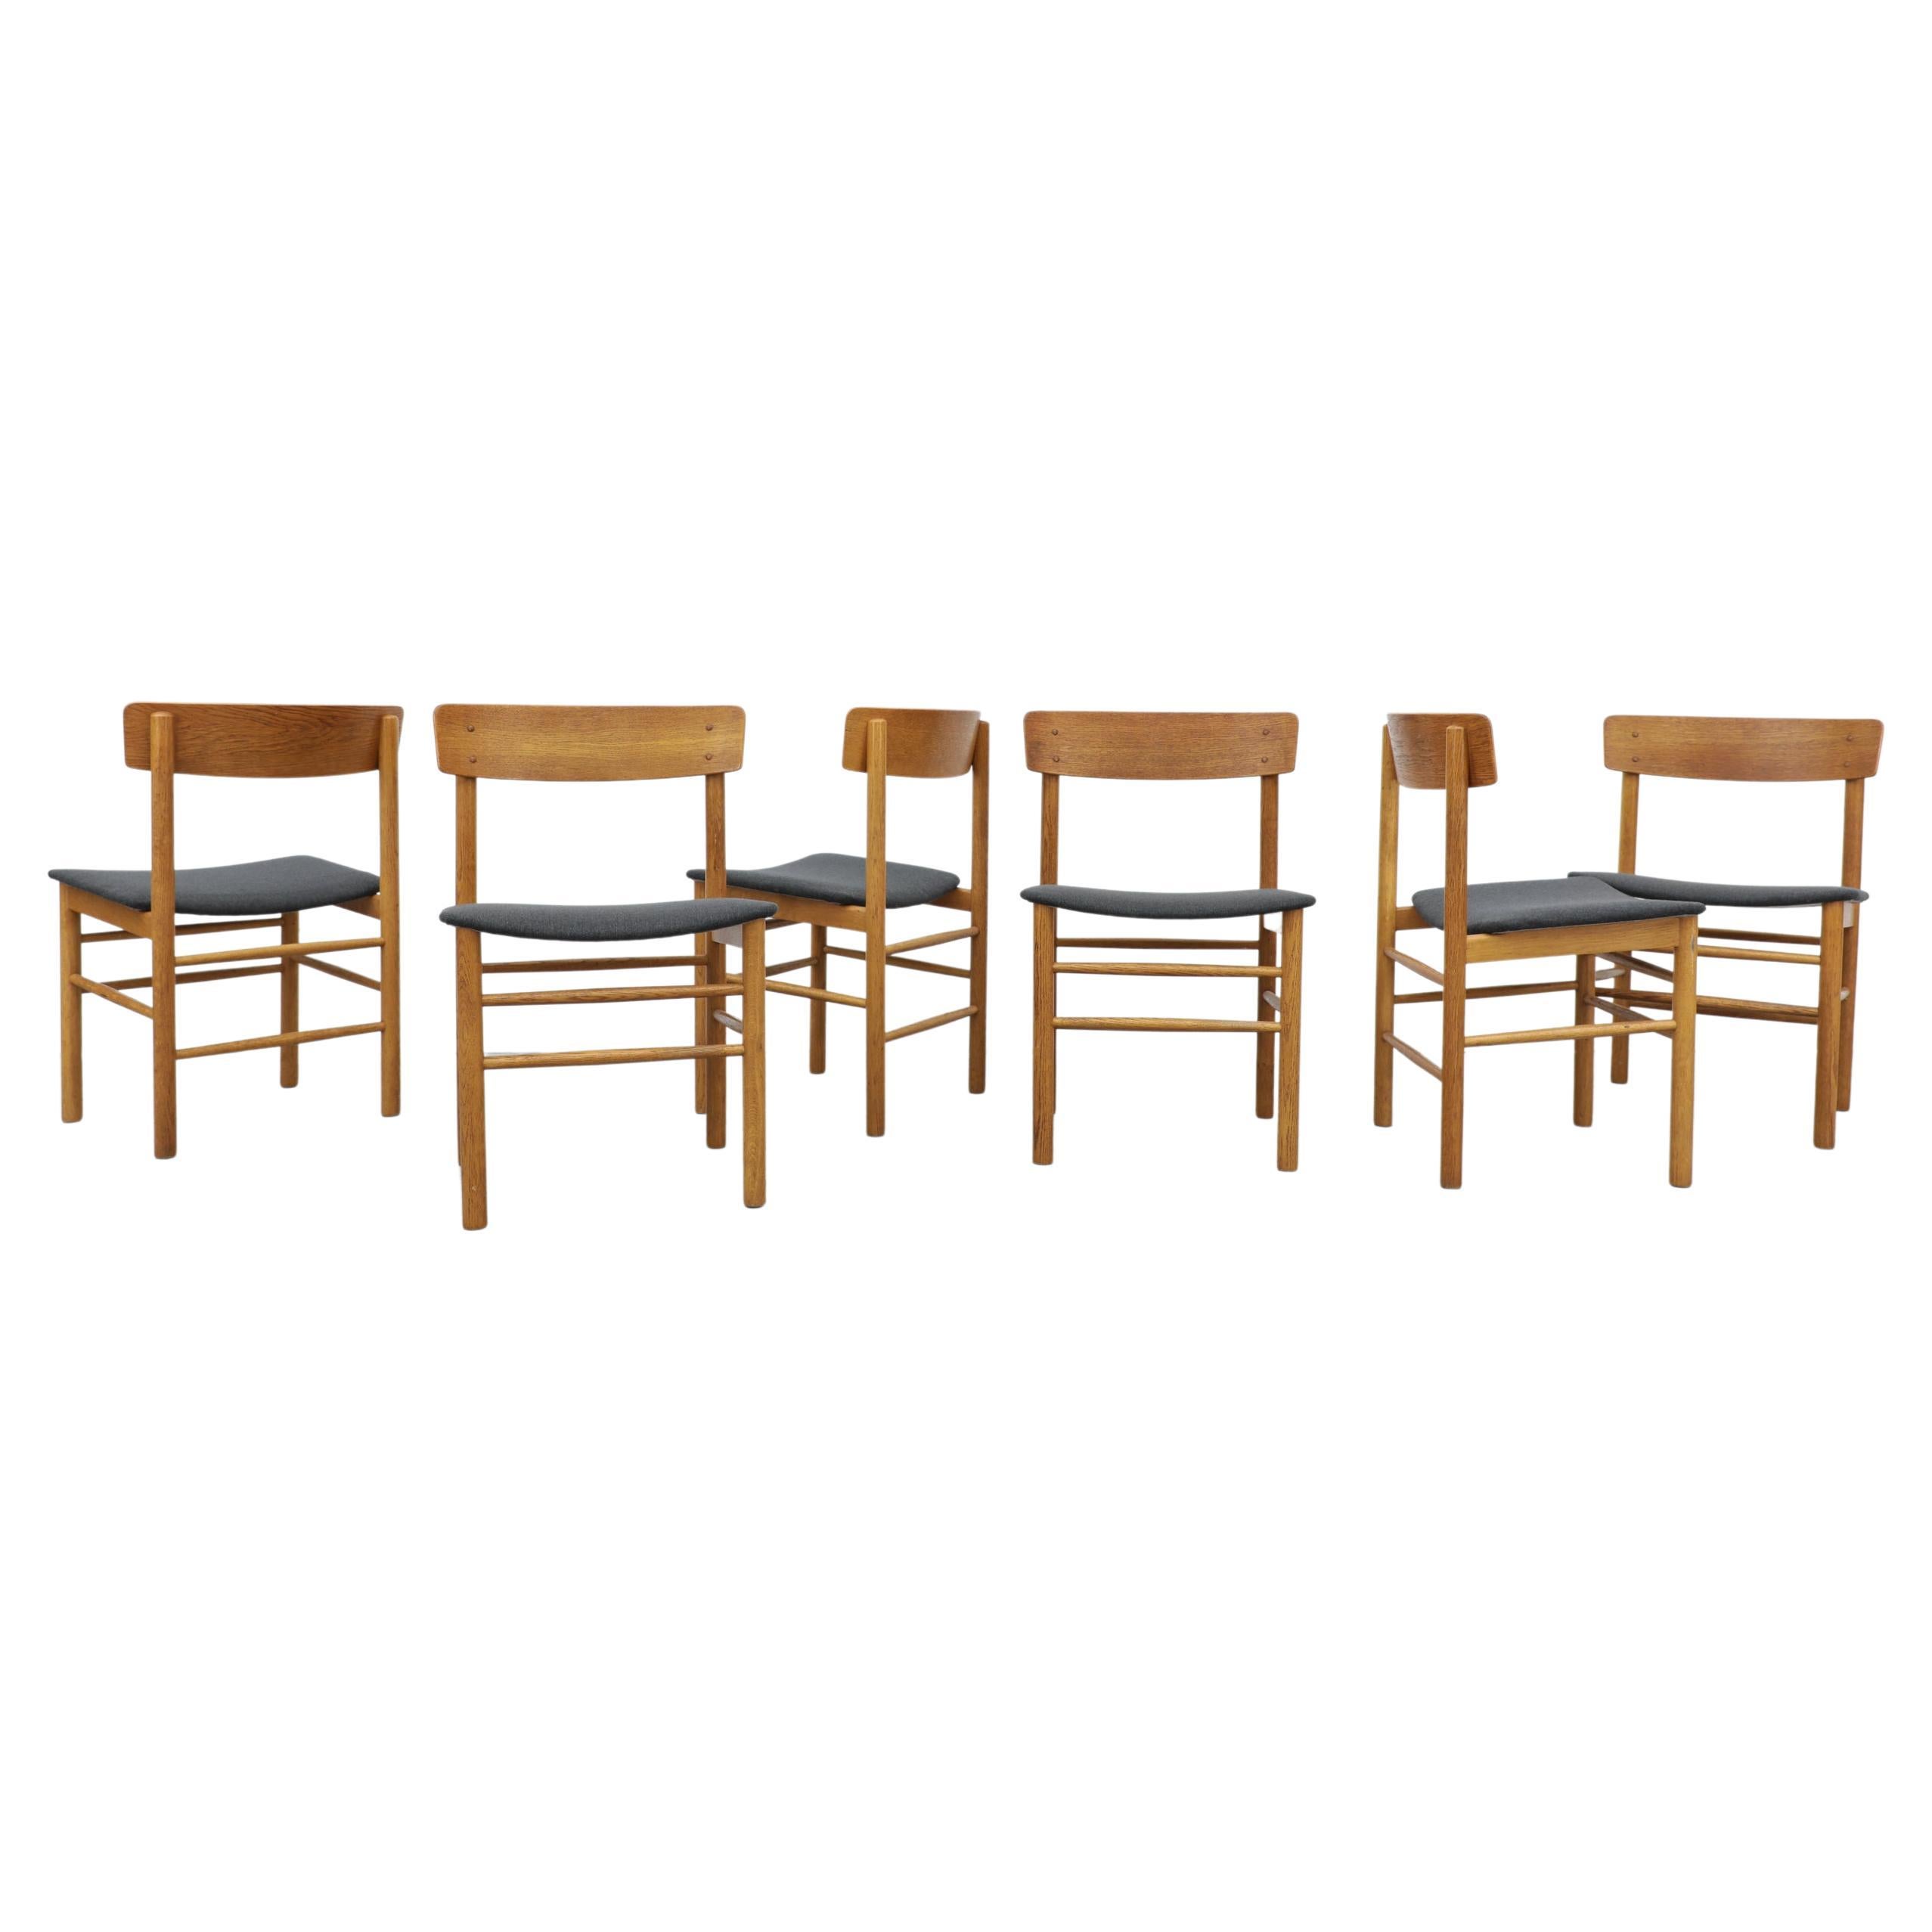 Set of 6 Børge Mogensen Oak Chairs Model 3236 with Gray Upholstered Seats